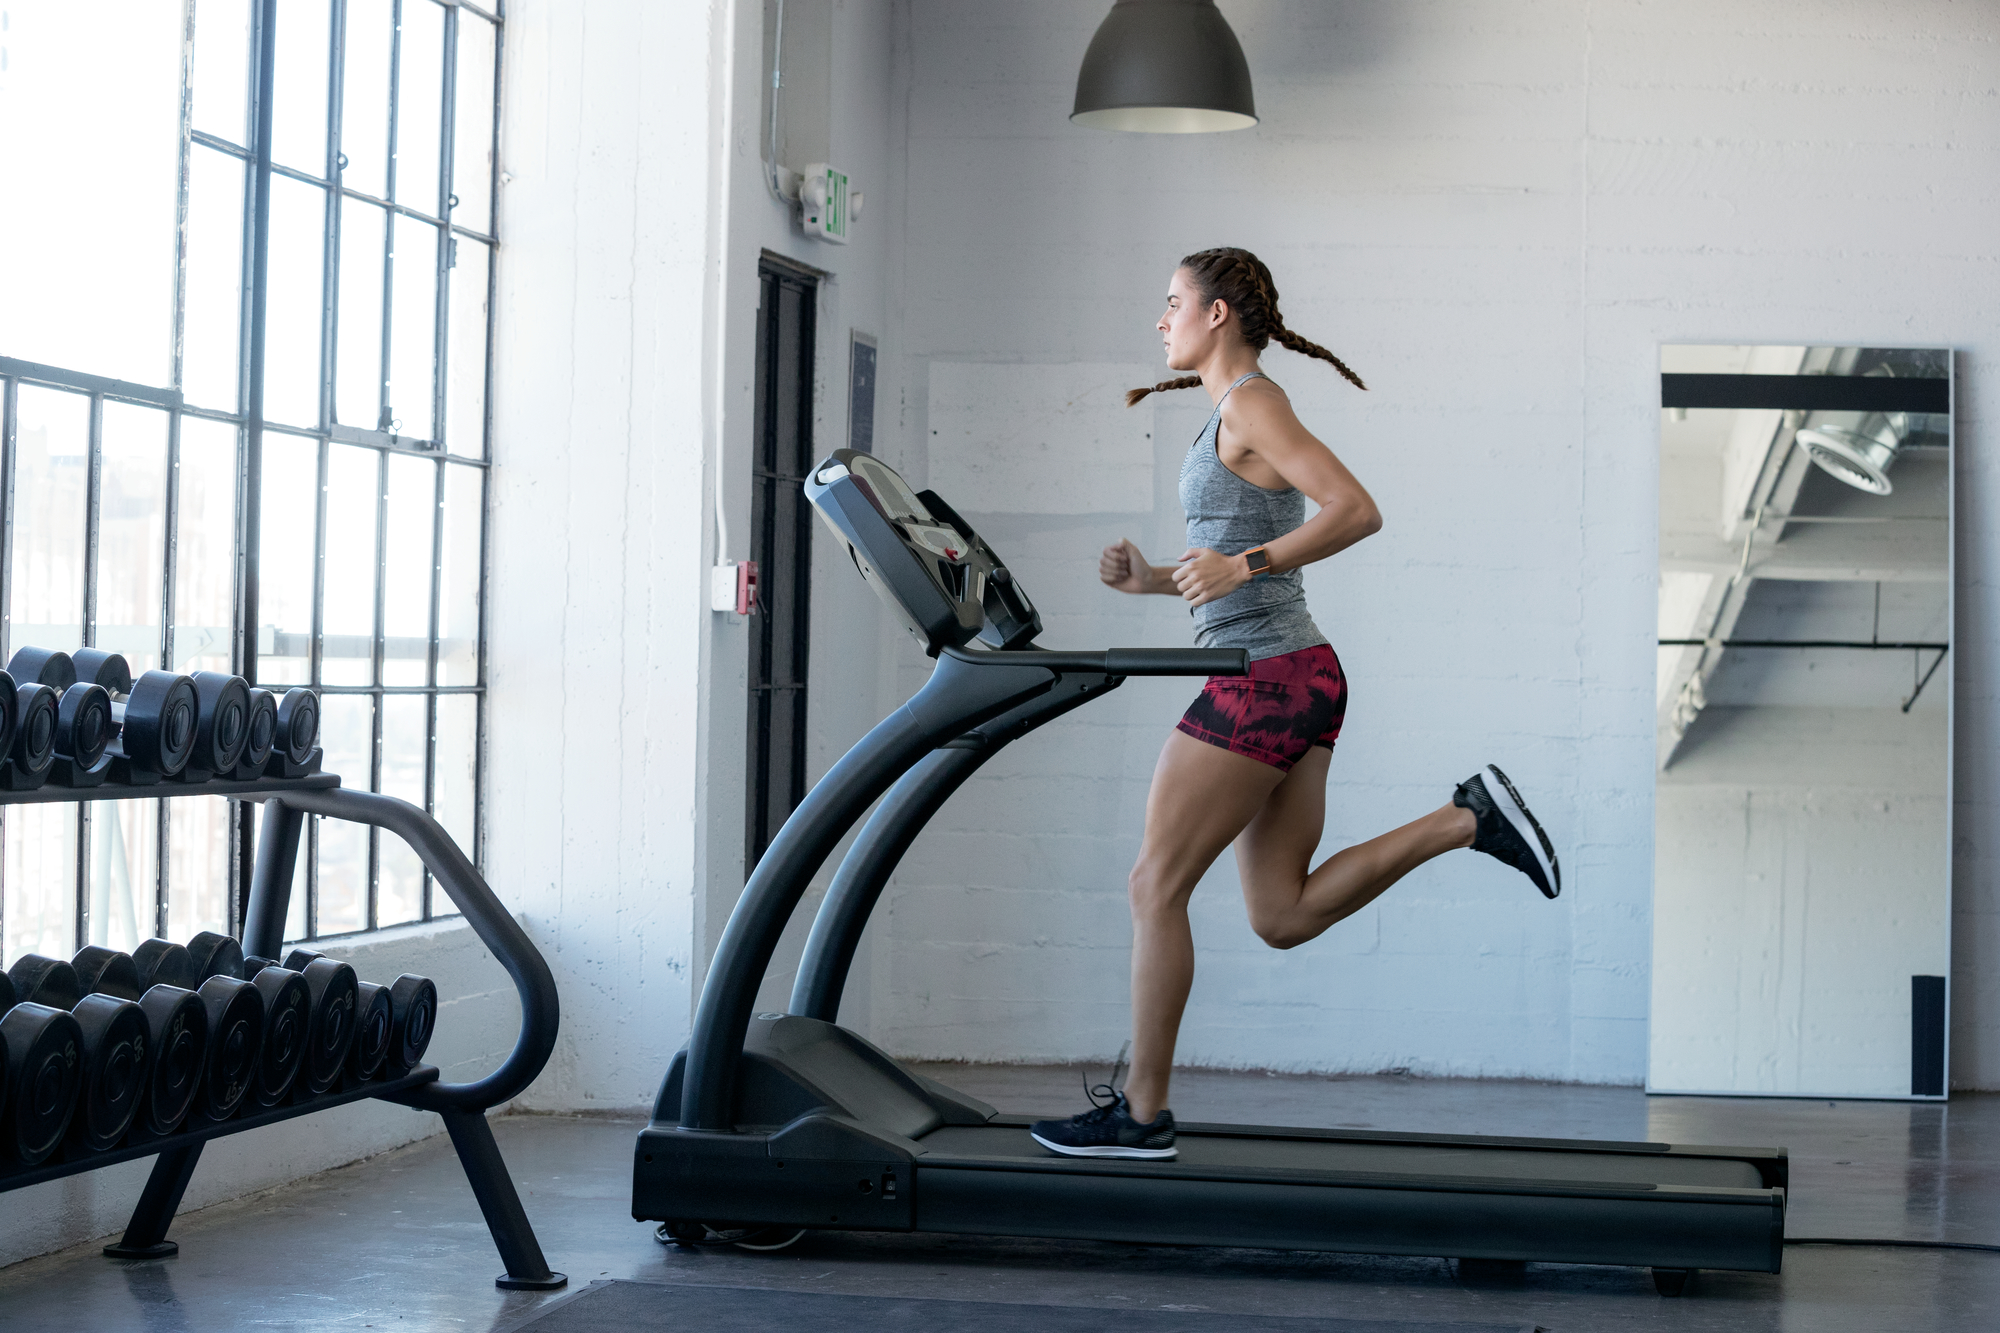 Take Your Warm-Weather Run Indoors with These Pro Tips